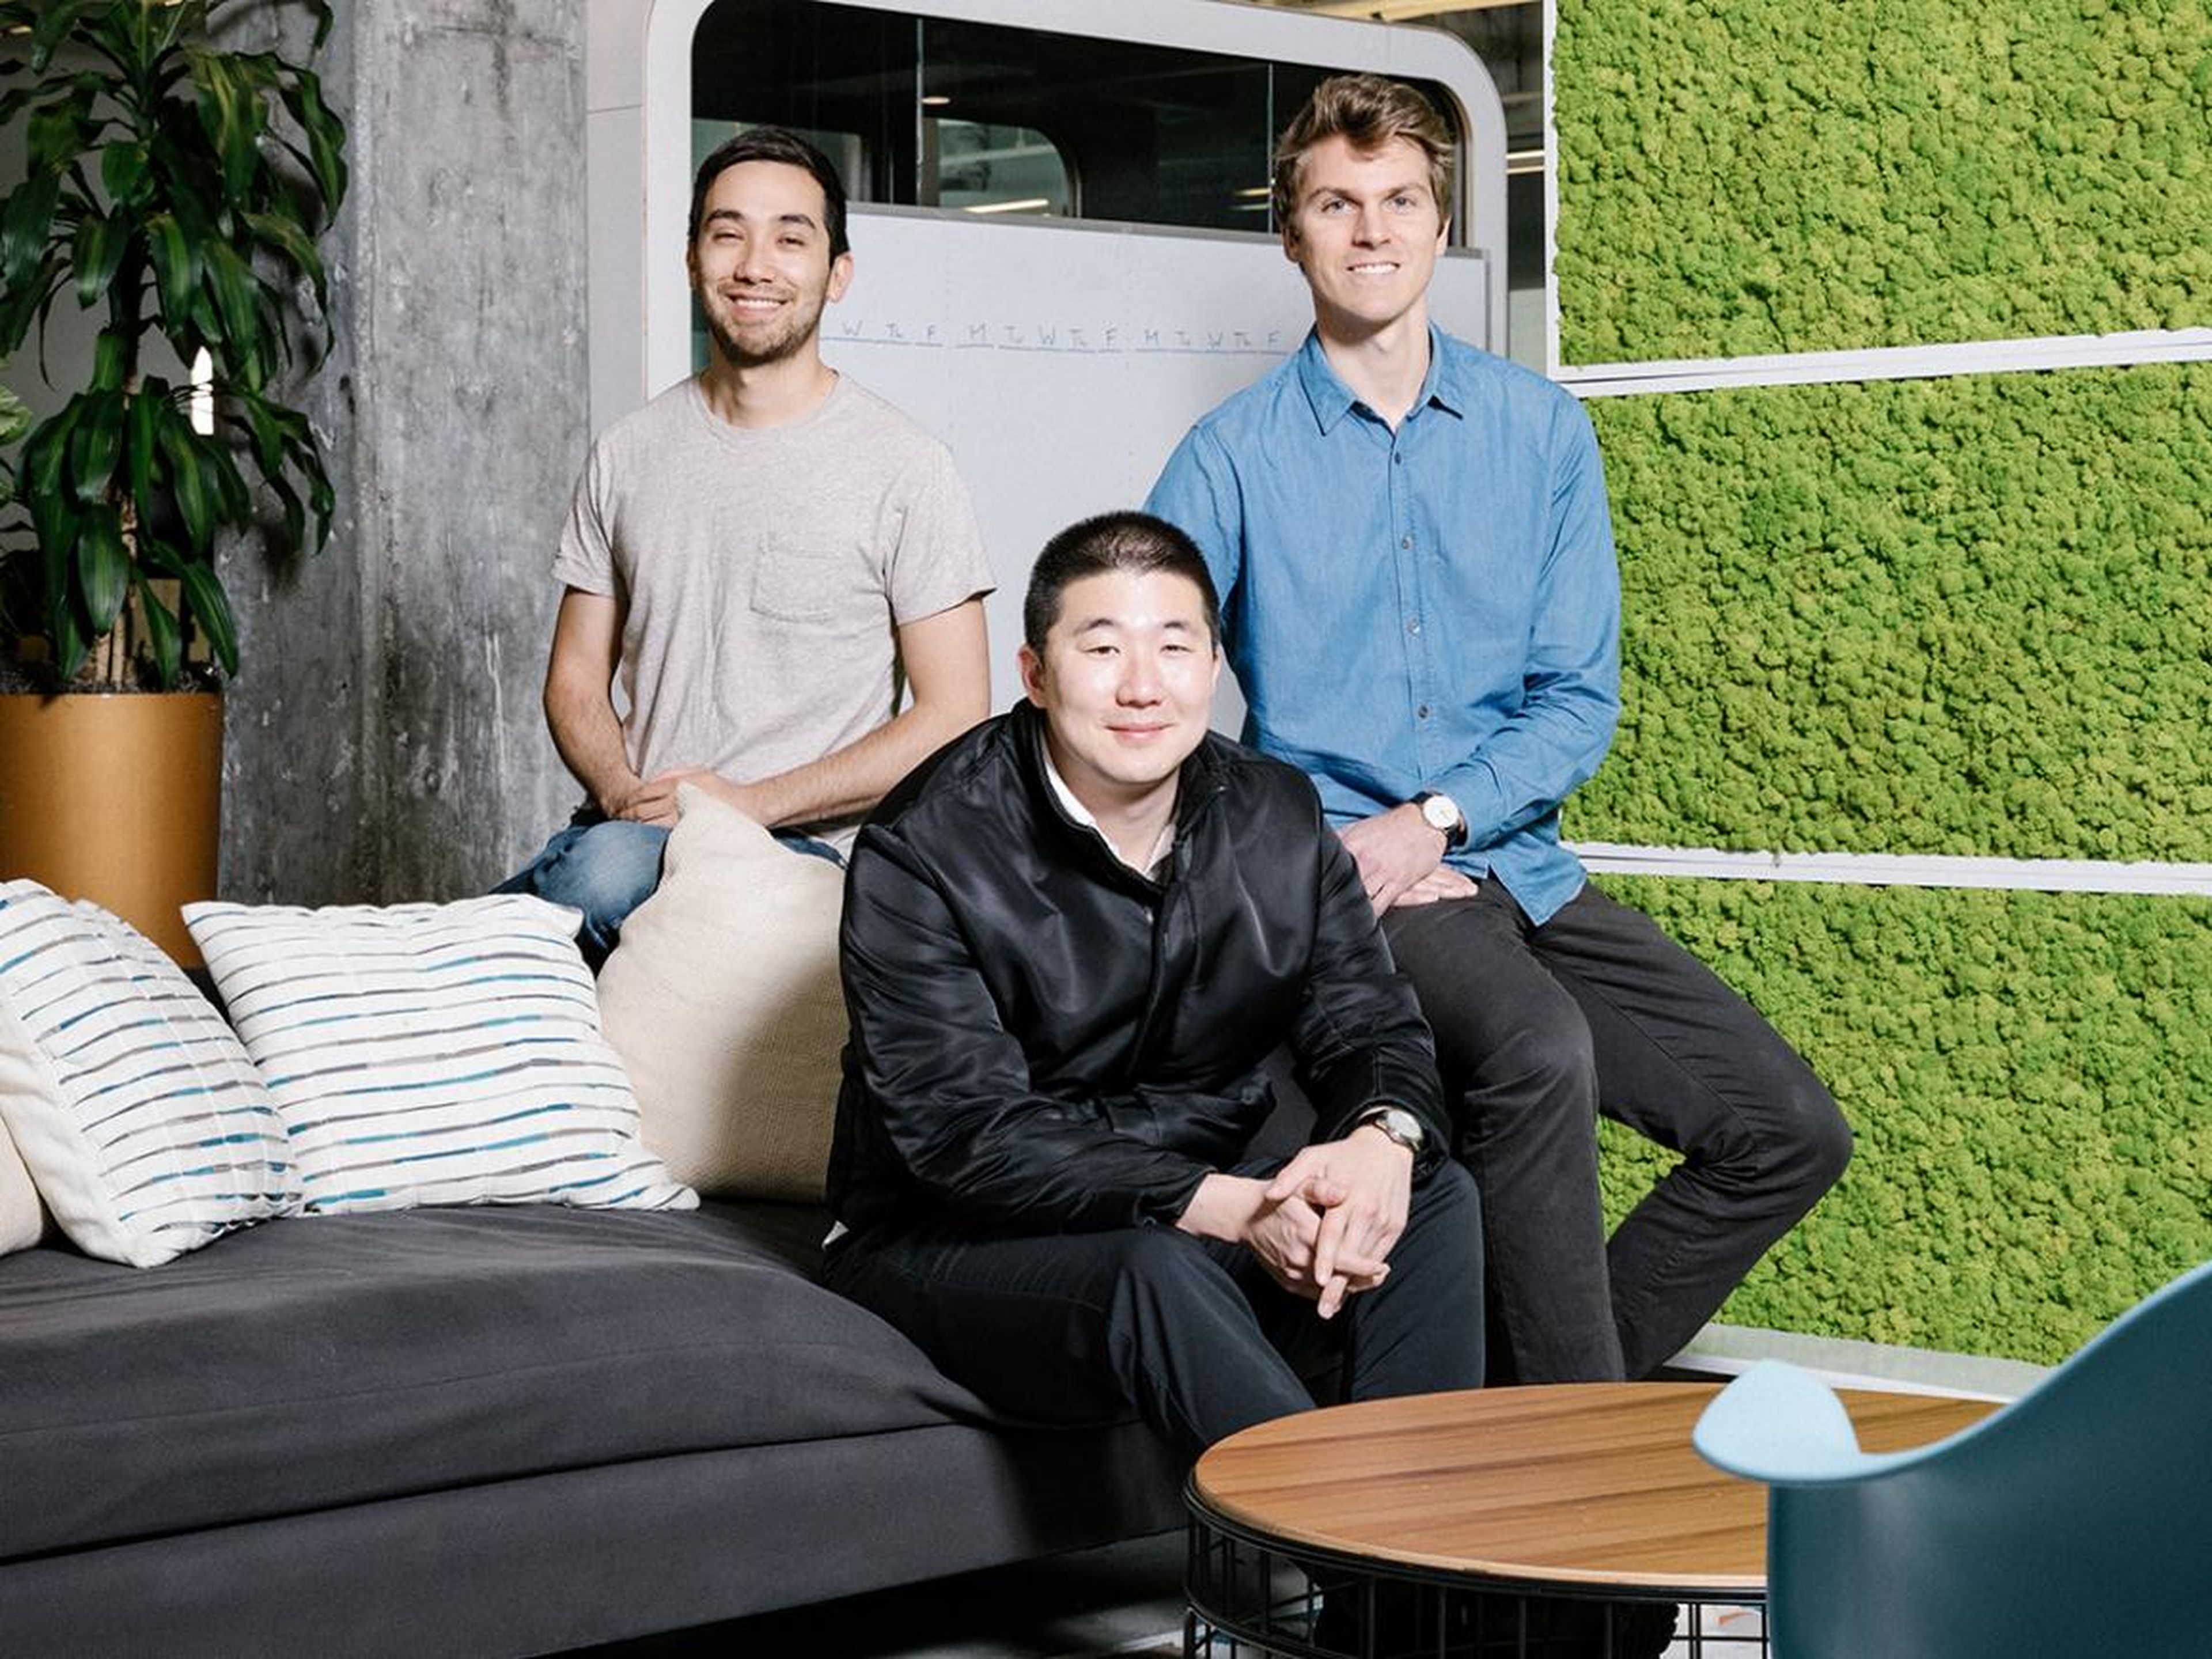 Howie Liu, Andrew Ofstad, and Emmet Nicholas, the founders of Airtable, want to let anyone build an app, even if they can't code